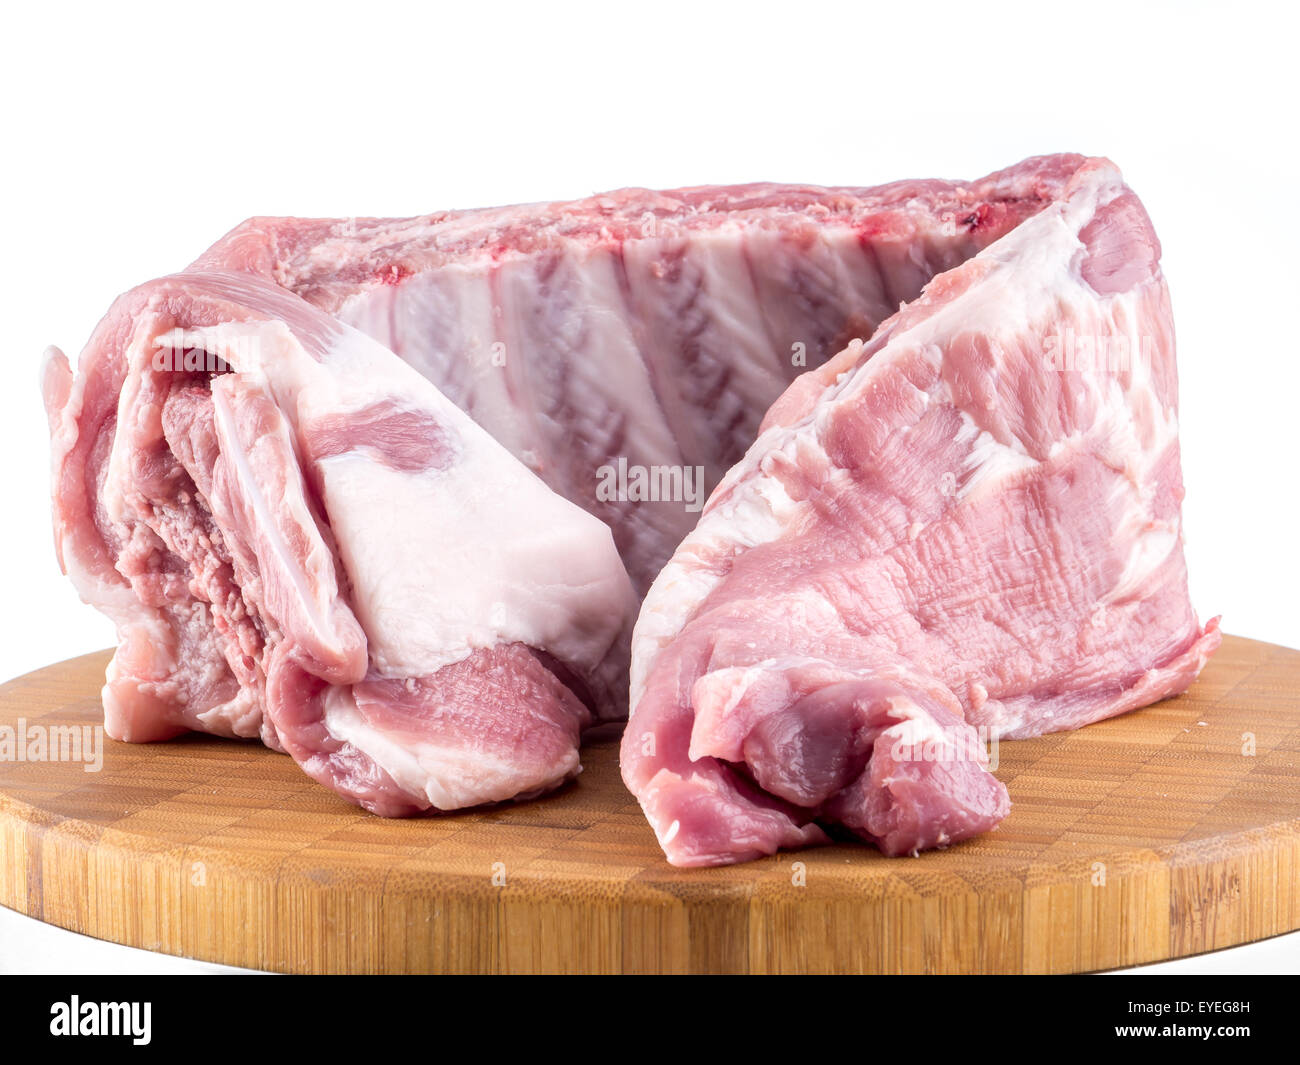 Raw pork ribs on wooden board over white background Stock Photo